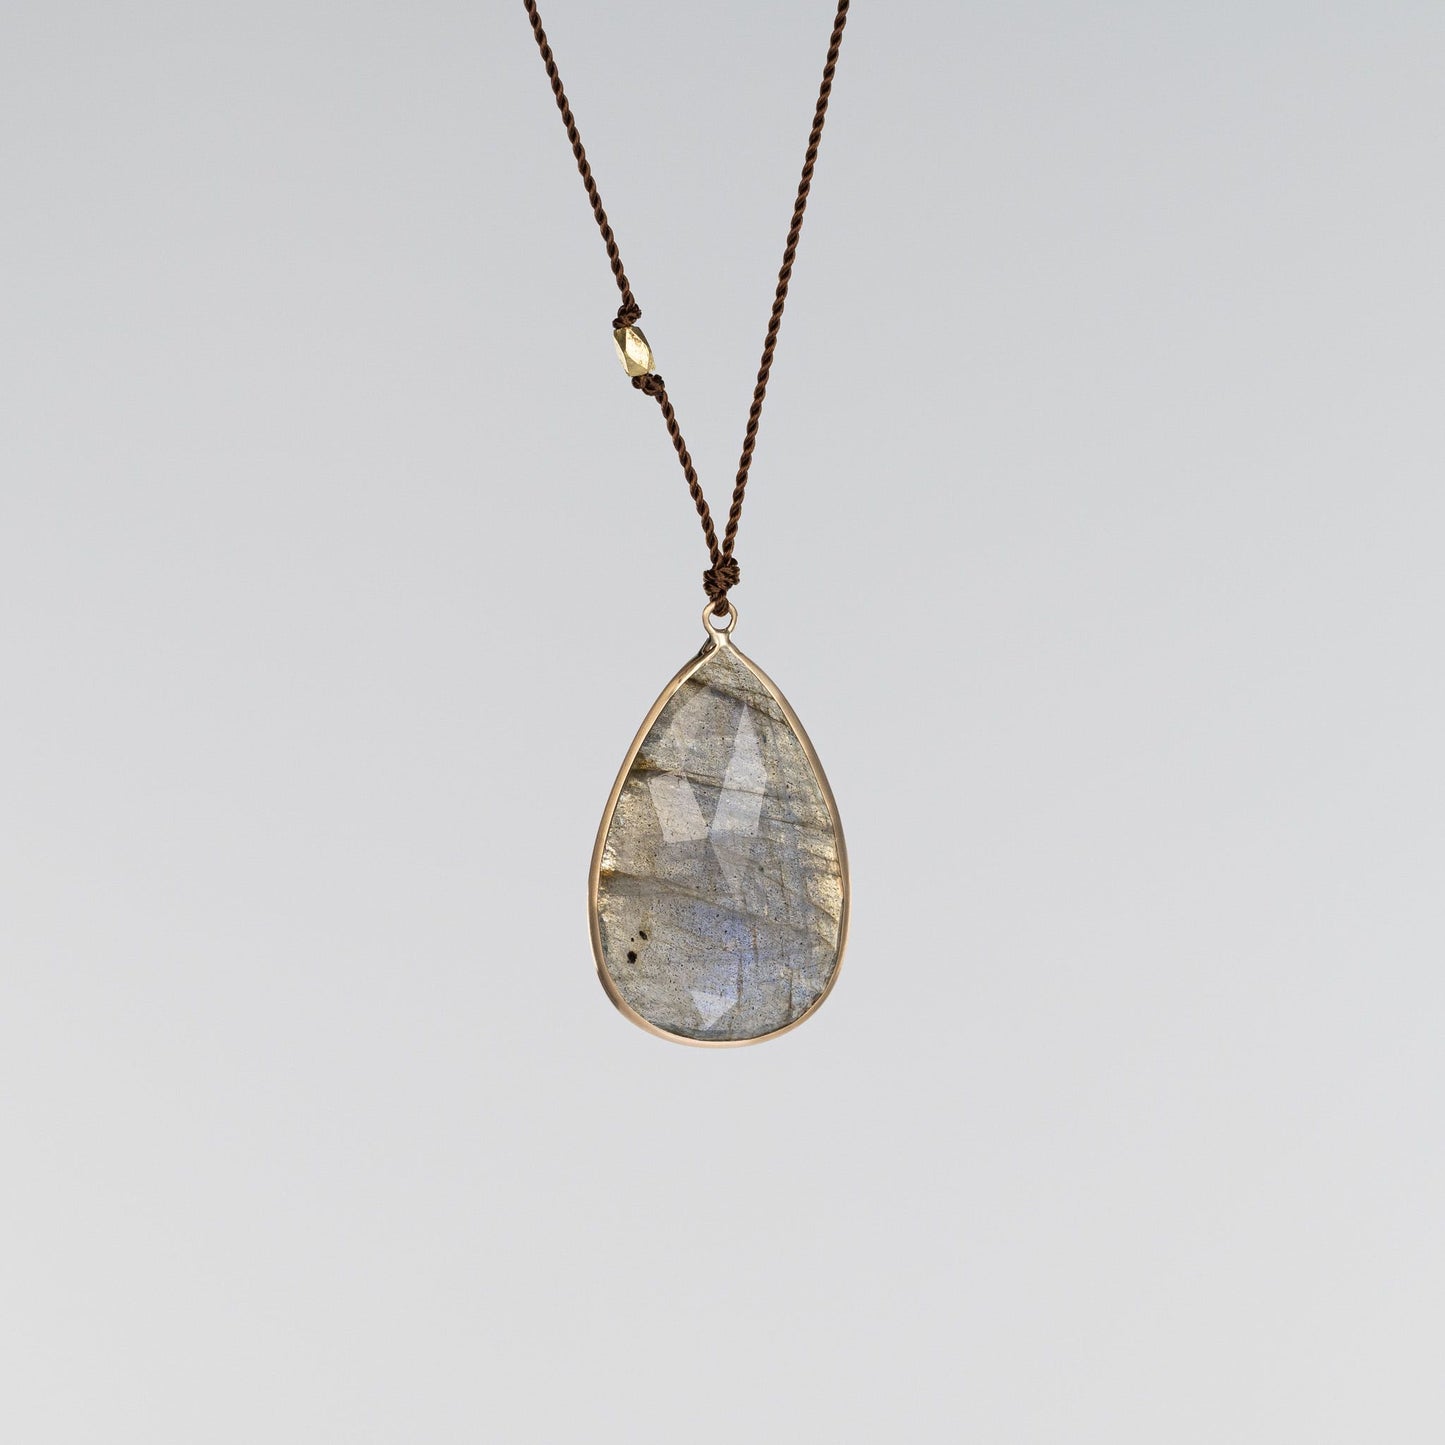 Load image into Gallery viewer, 14K Yellow Gold Teardrop Labradorite + 18K Bead Necklace
